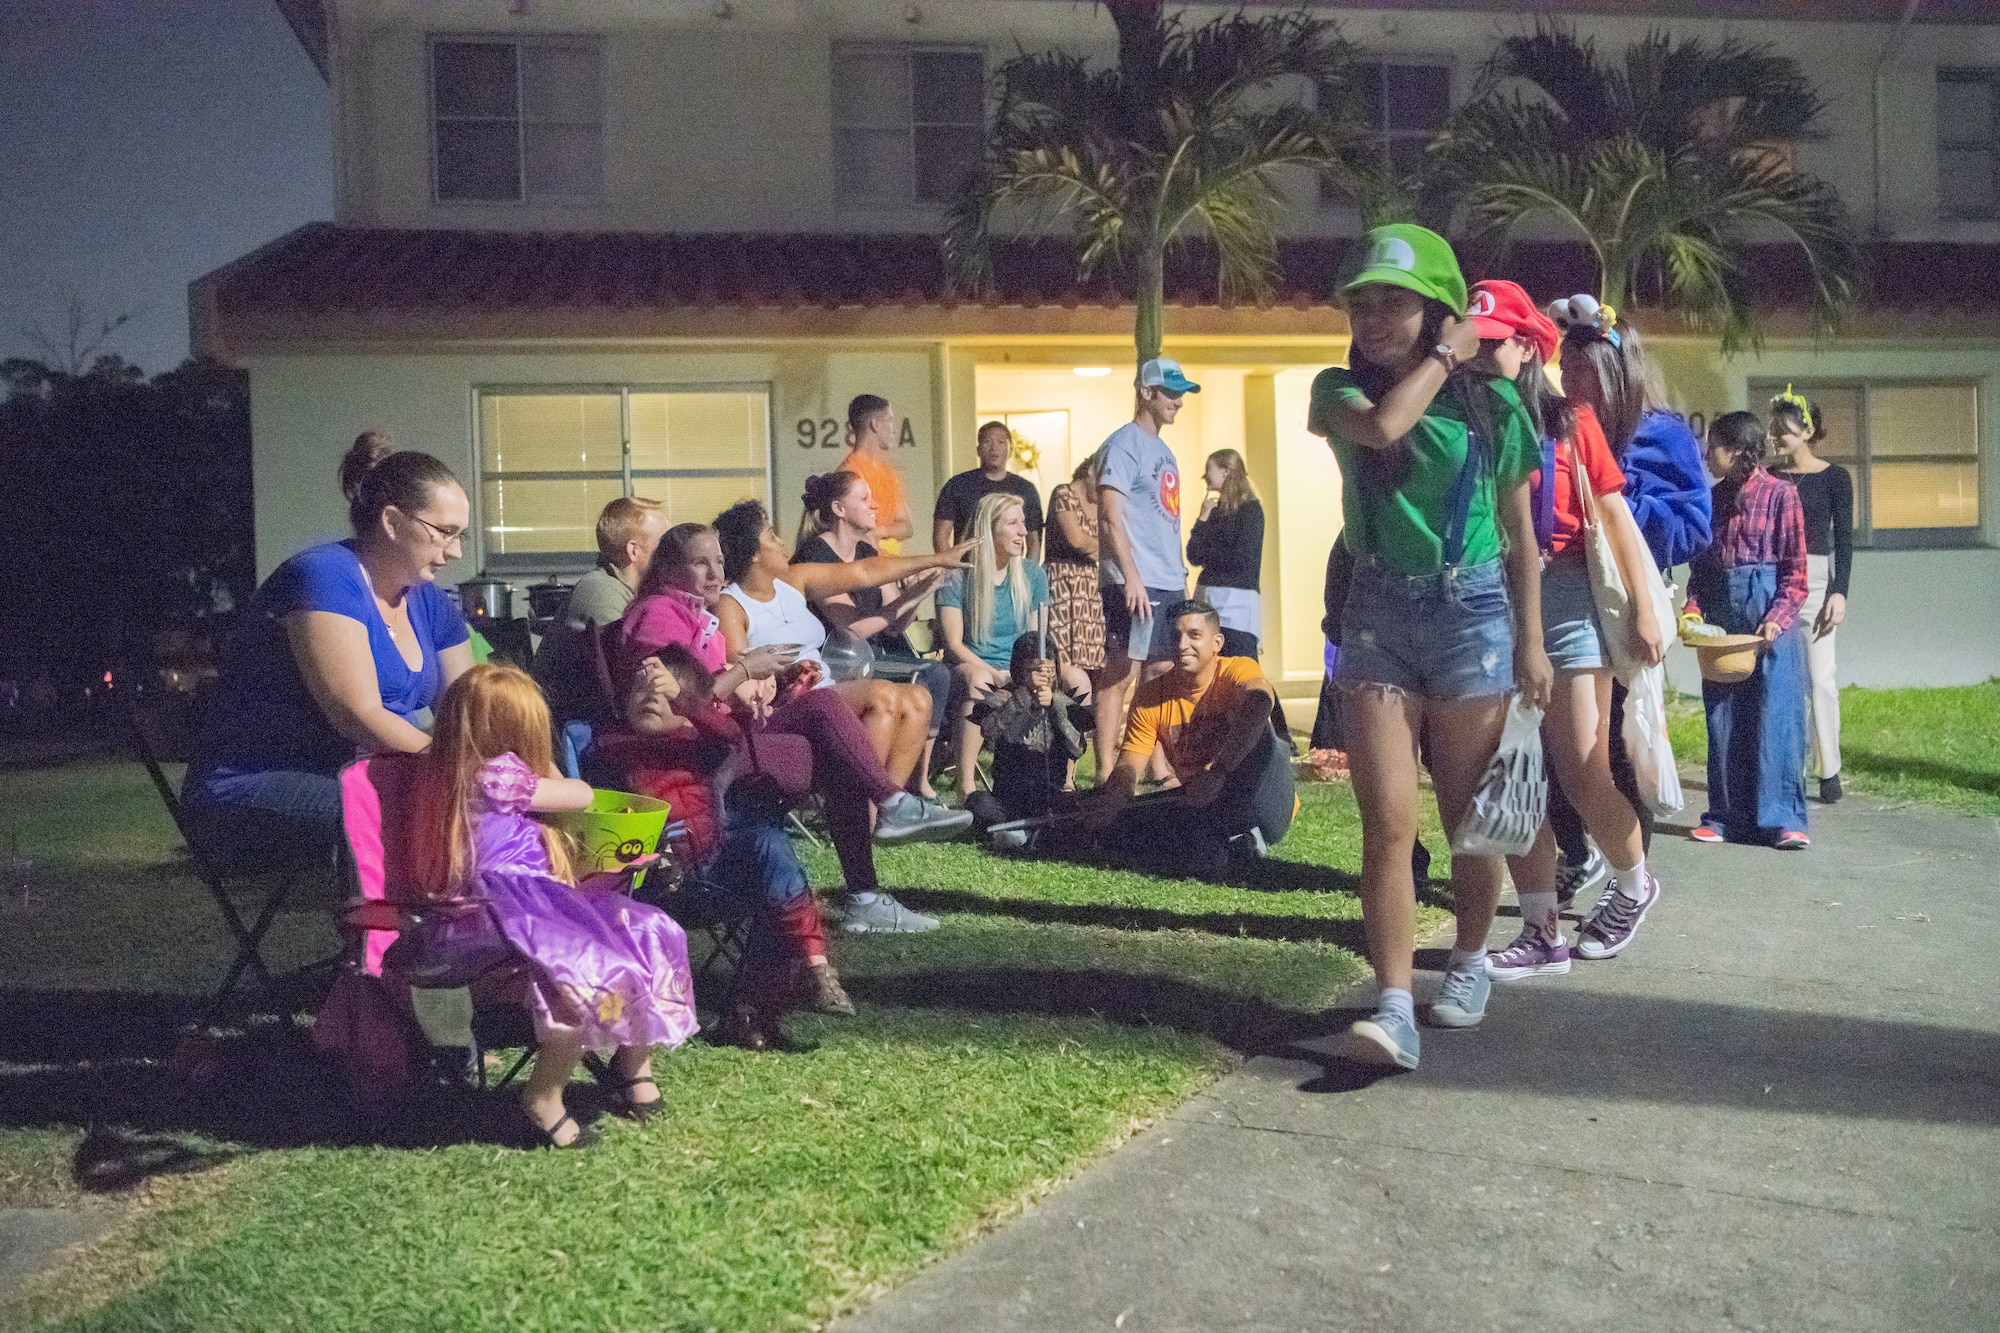 Children from Kadena Air Base, Japan, and Okinawa participate in a Halloween trick-or-treat event Oct. 31, 2019, on Kadena Air Base. The base opened its gates to a portion of the local community to share the traditional custom of trick-or-treating to enhance relations with host nation partners. (U.S. Air Force photo by Senior Airman Rhett Isbell)